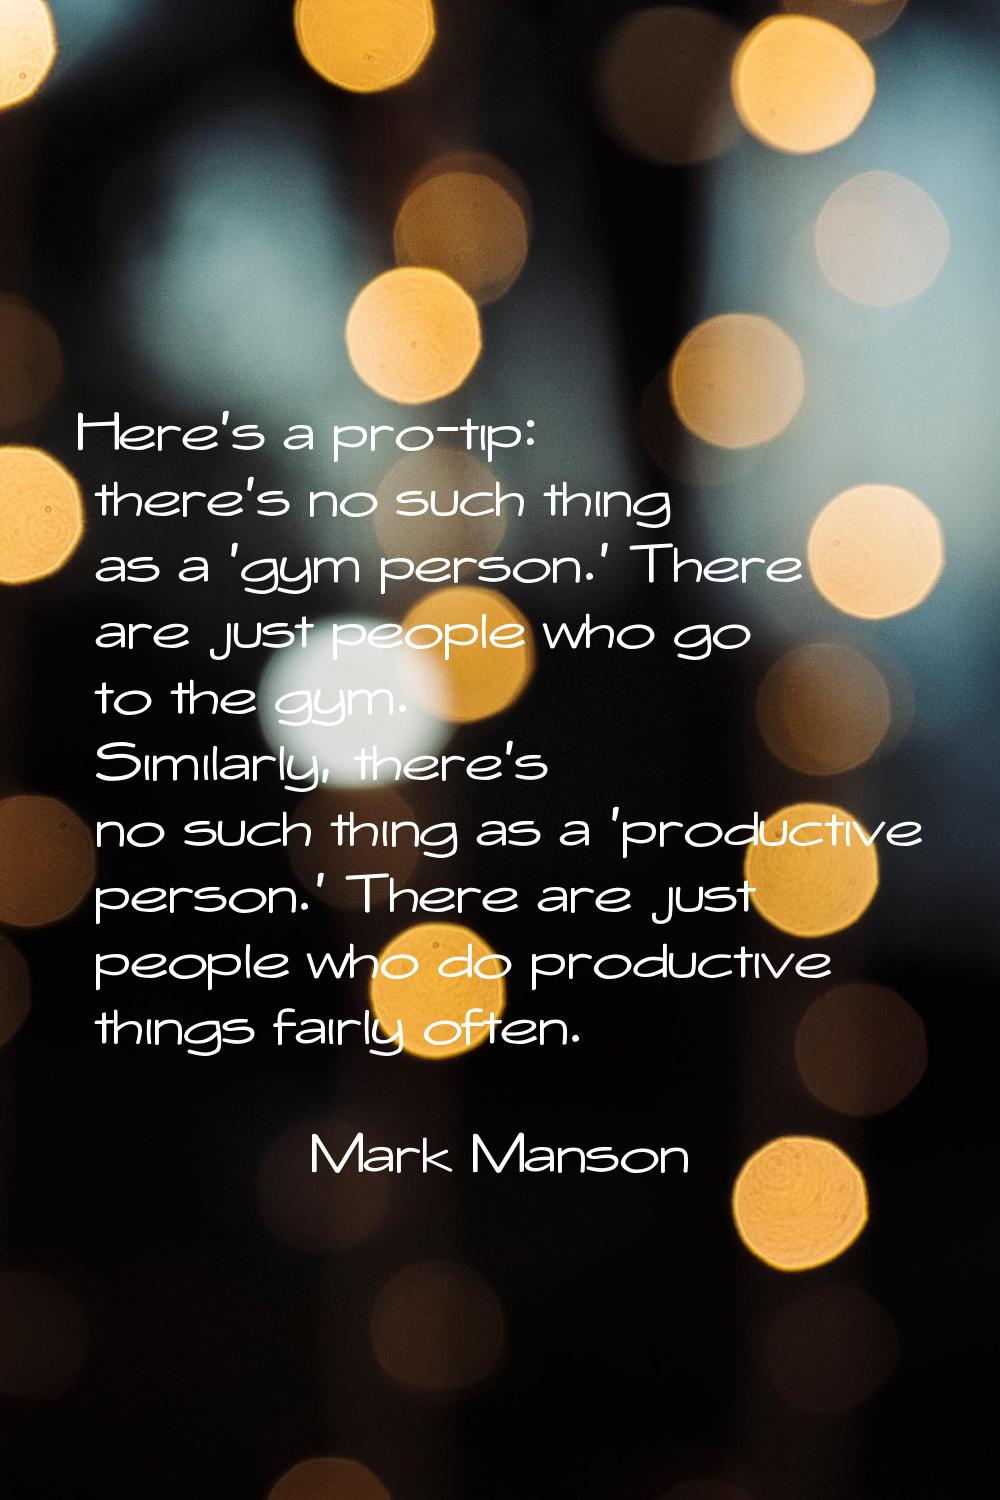 Here's a pro-tip: there's no such thing as a 'gym person.' There are just people who go to the gym.